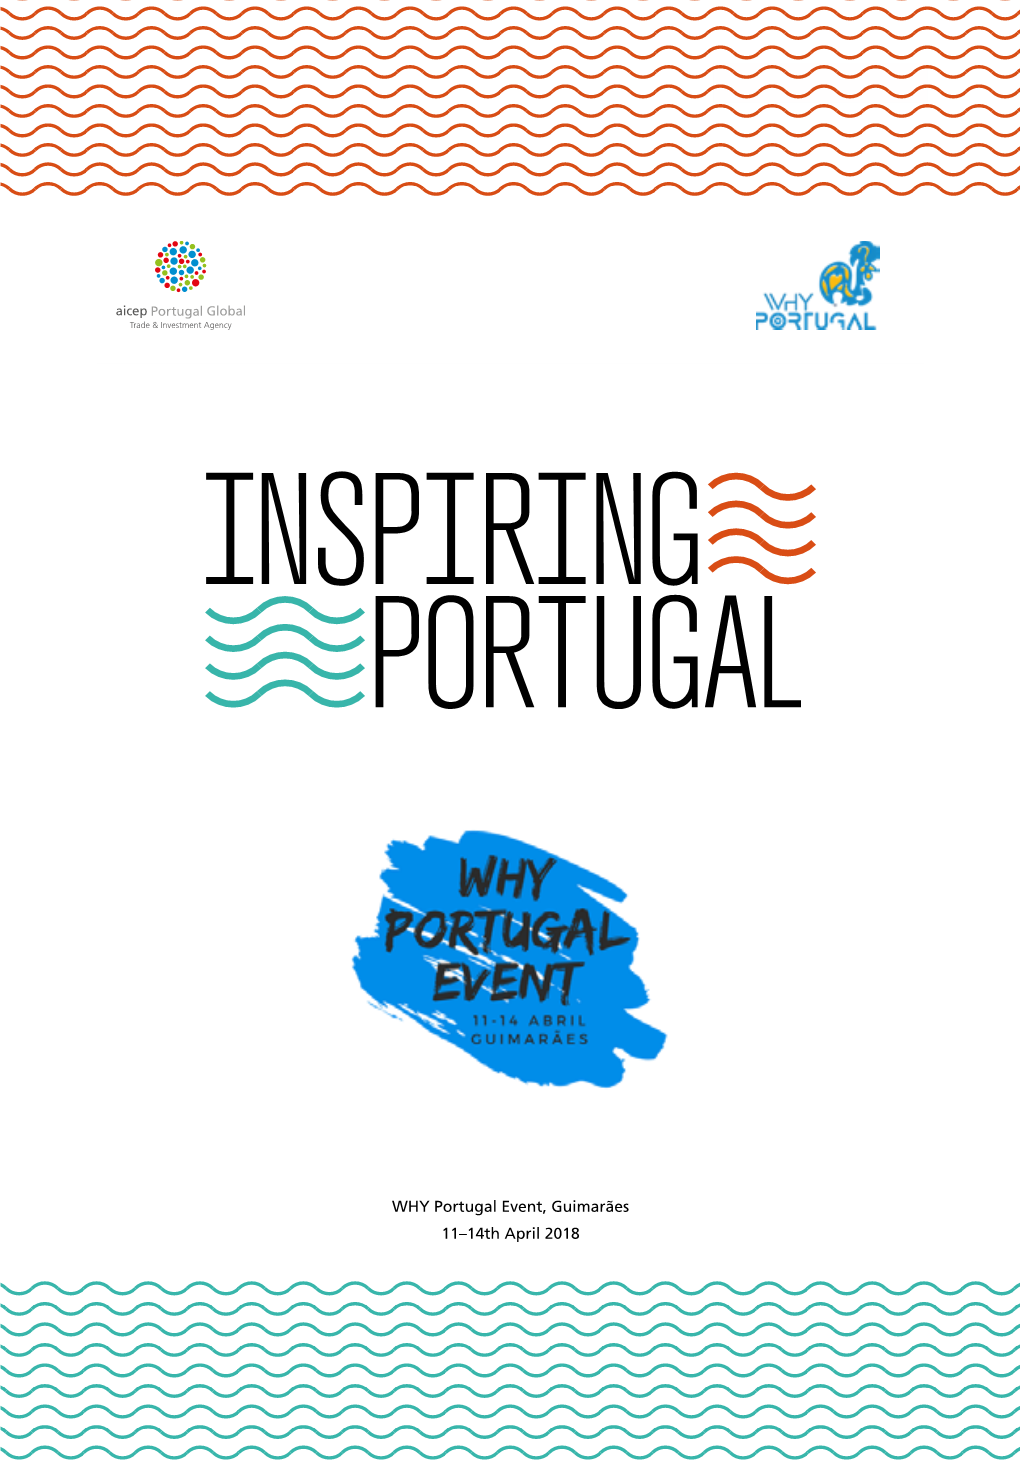 Aicep Portugal Global • 1 WHY Portugal Event, Guimarães 11–14Th April 2018